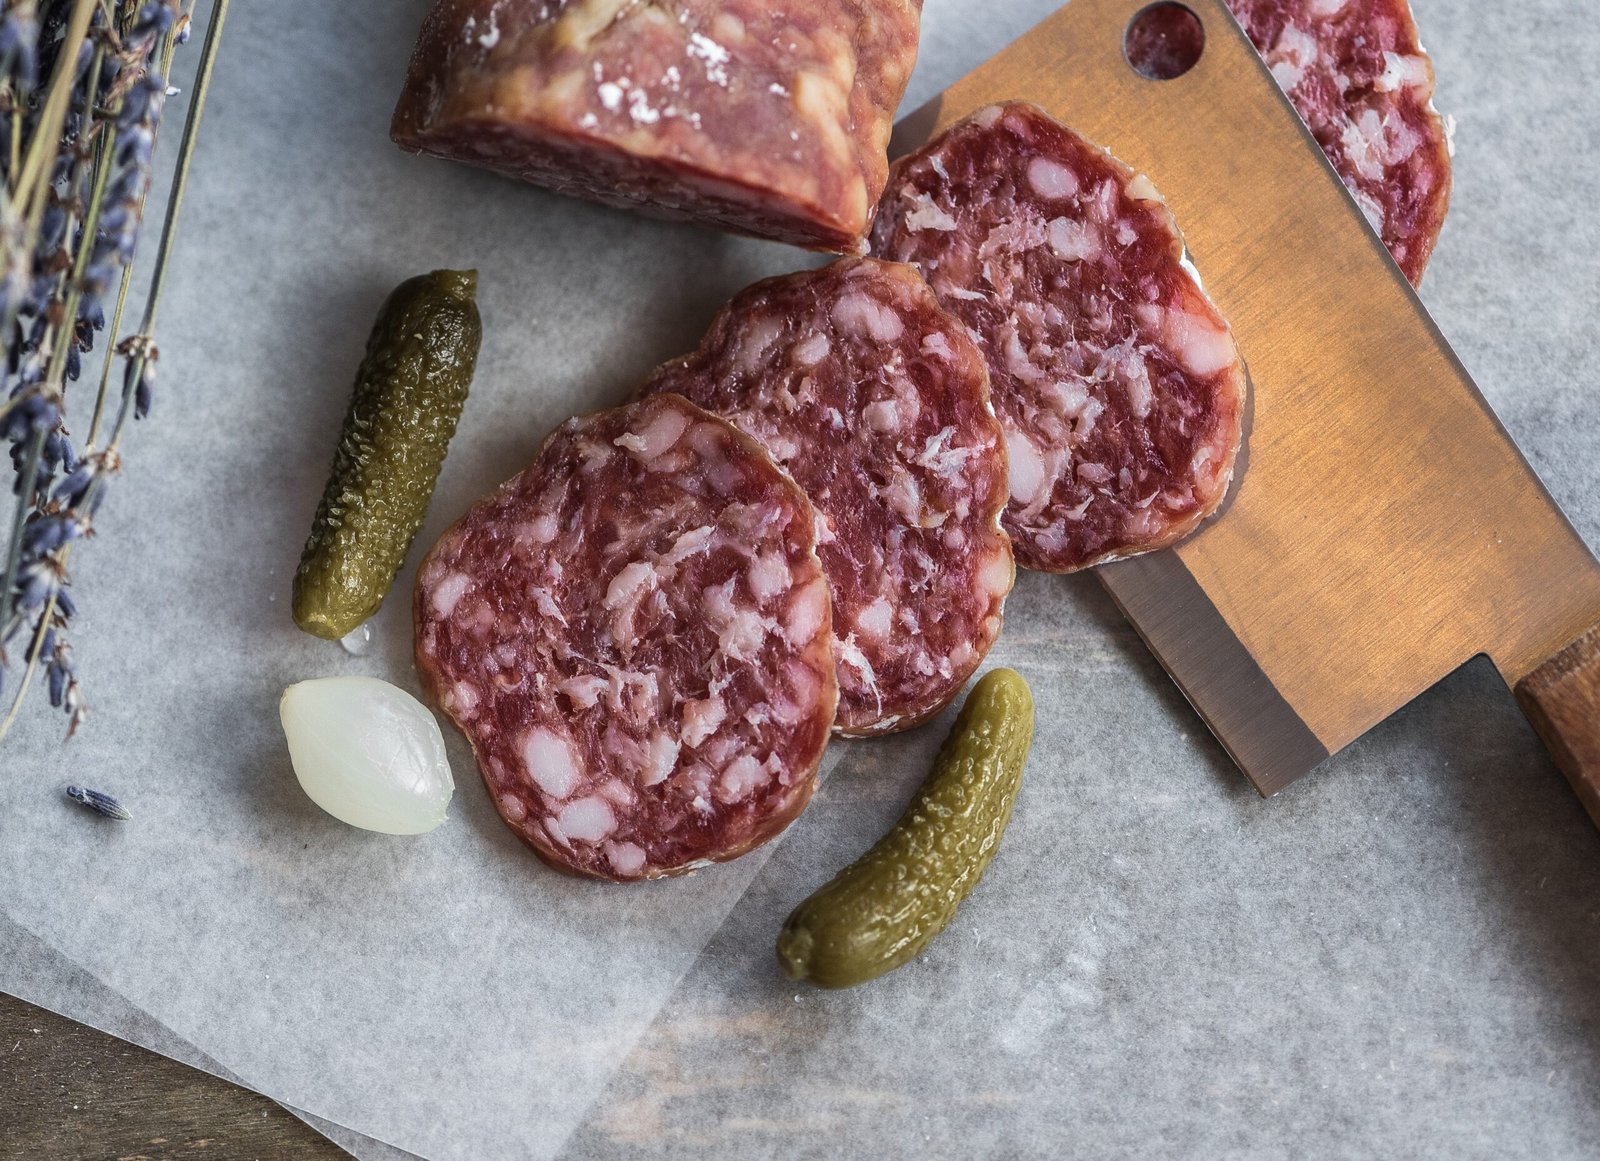 The Gourmet Delight: Exploring the Irresistible Combination of Salami and Cheese